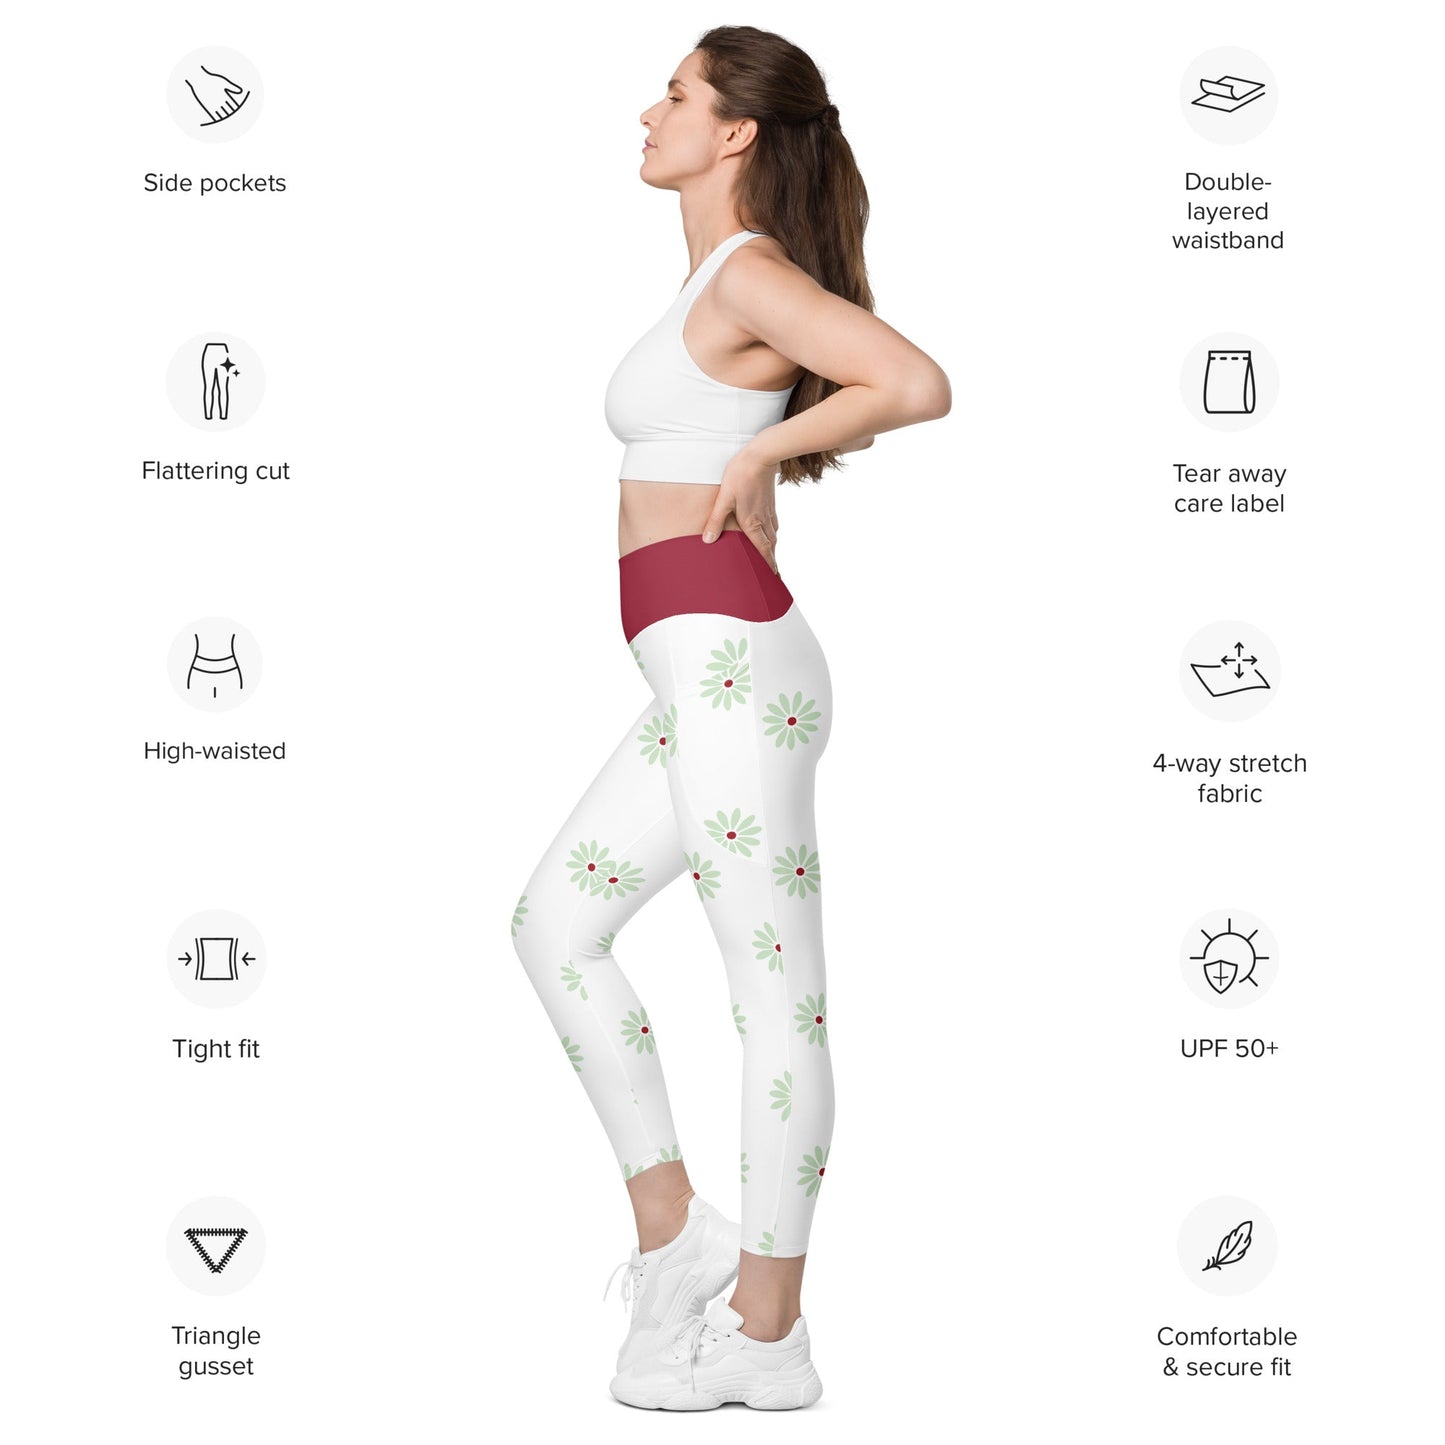 Tightrope Walker Leggings with pockets activewearboo to youWrong Lever Clothing